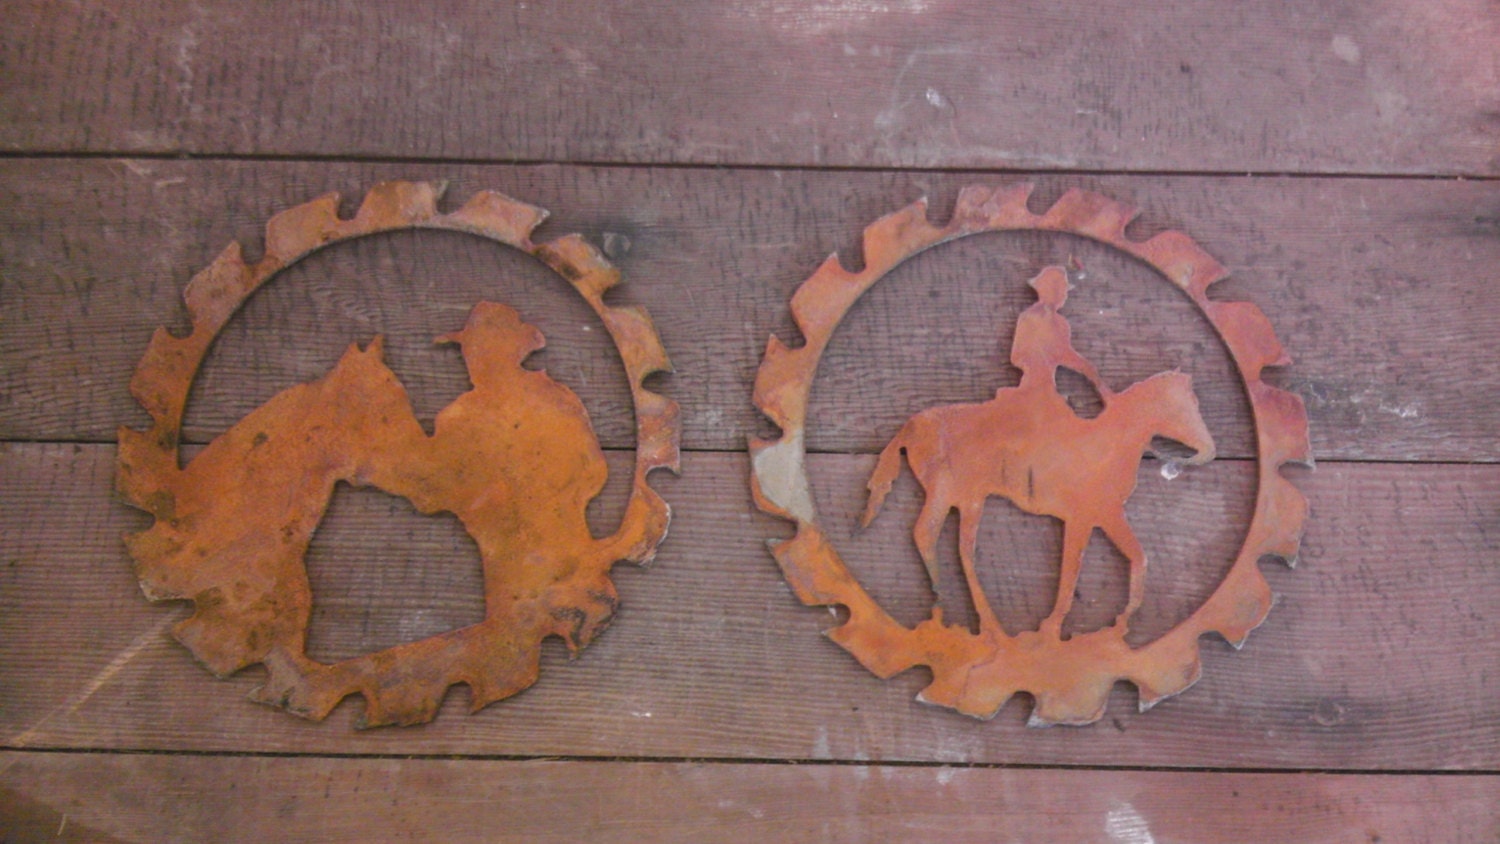 Set Lot of 2 Rusty Rough Vintage Cowboy and Horse Saw Blades 6 inch Metal Steel Western Wall Stencil